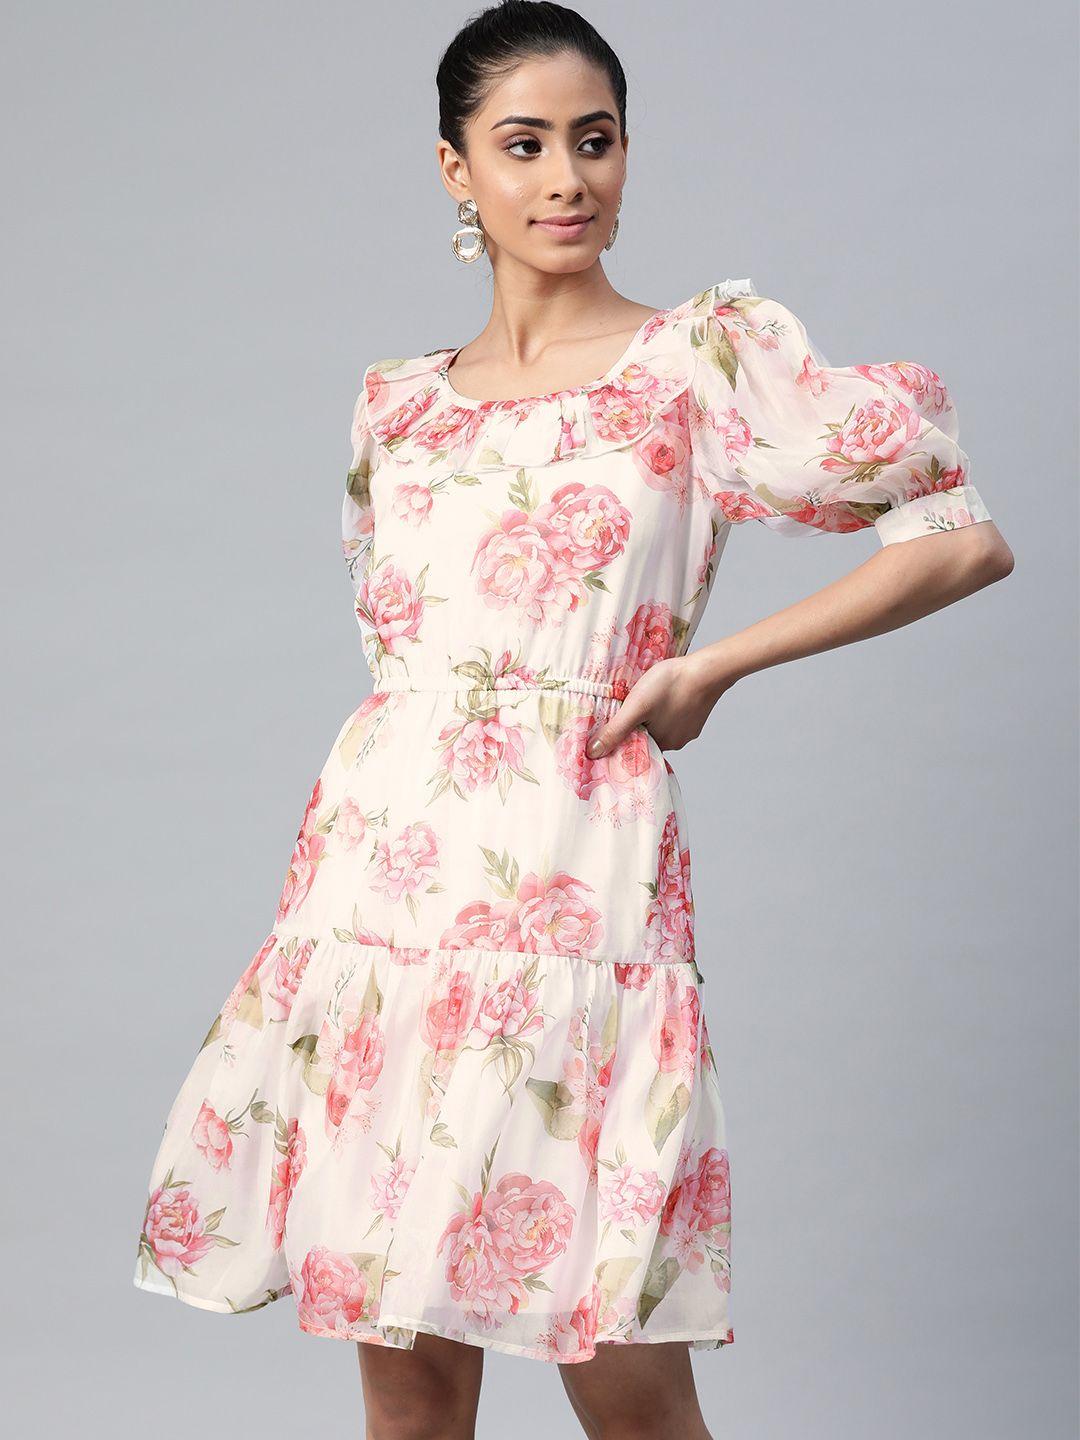 sassafras women white & pink floral printed tiered fit and flare dress